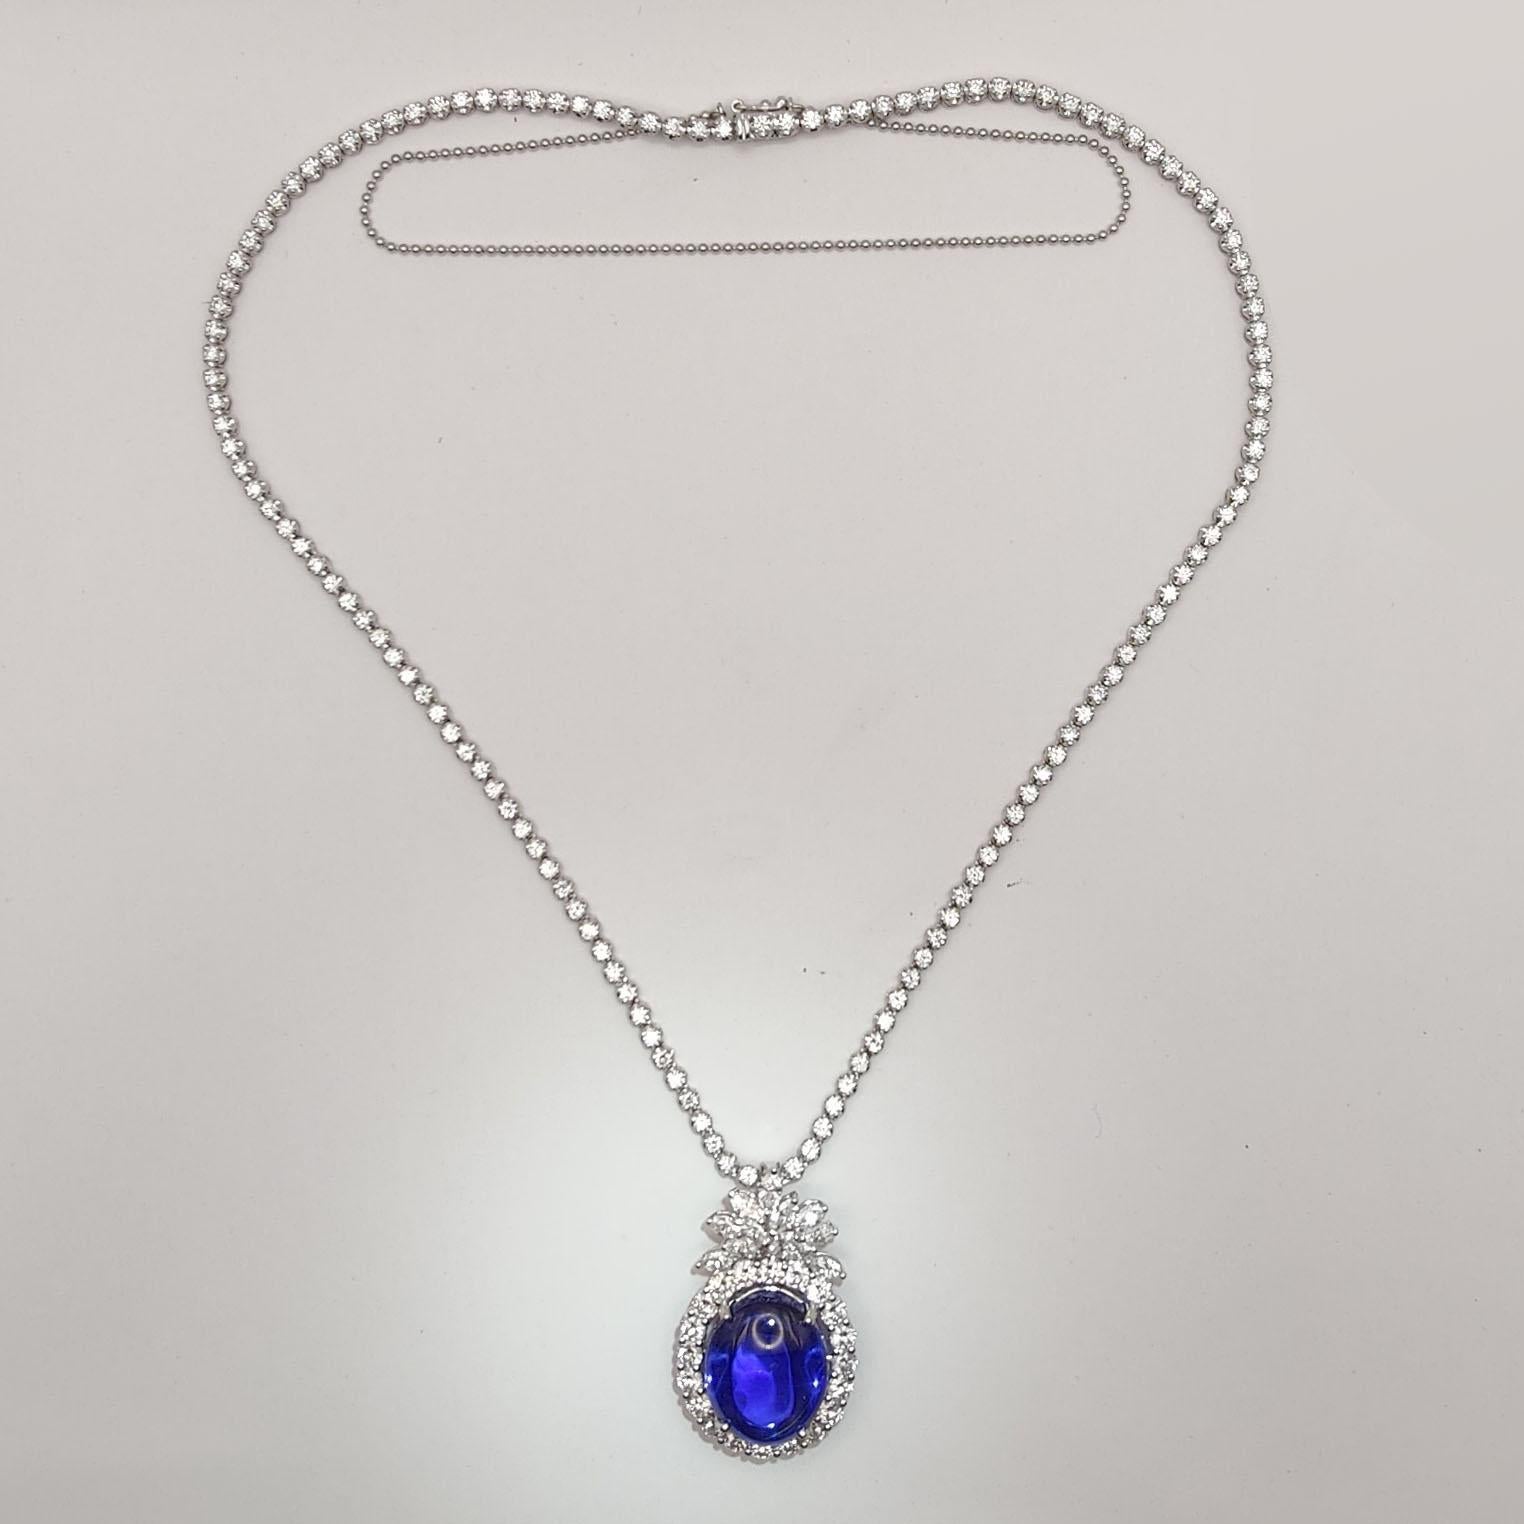 Gublin Certified 26.88ct Unheated Blue Star Sapphire & 7.41ct Diamond Necklace For Sale 2